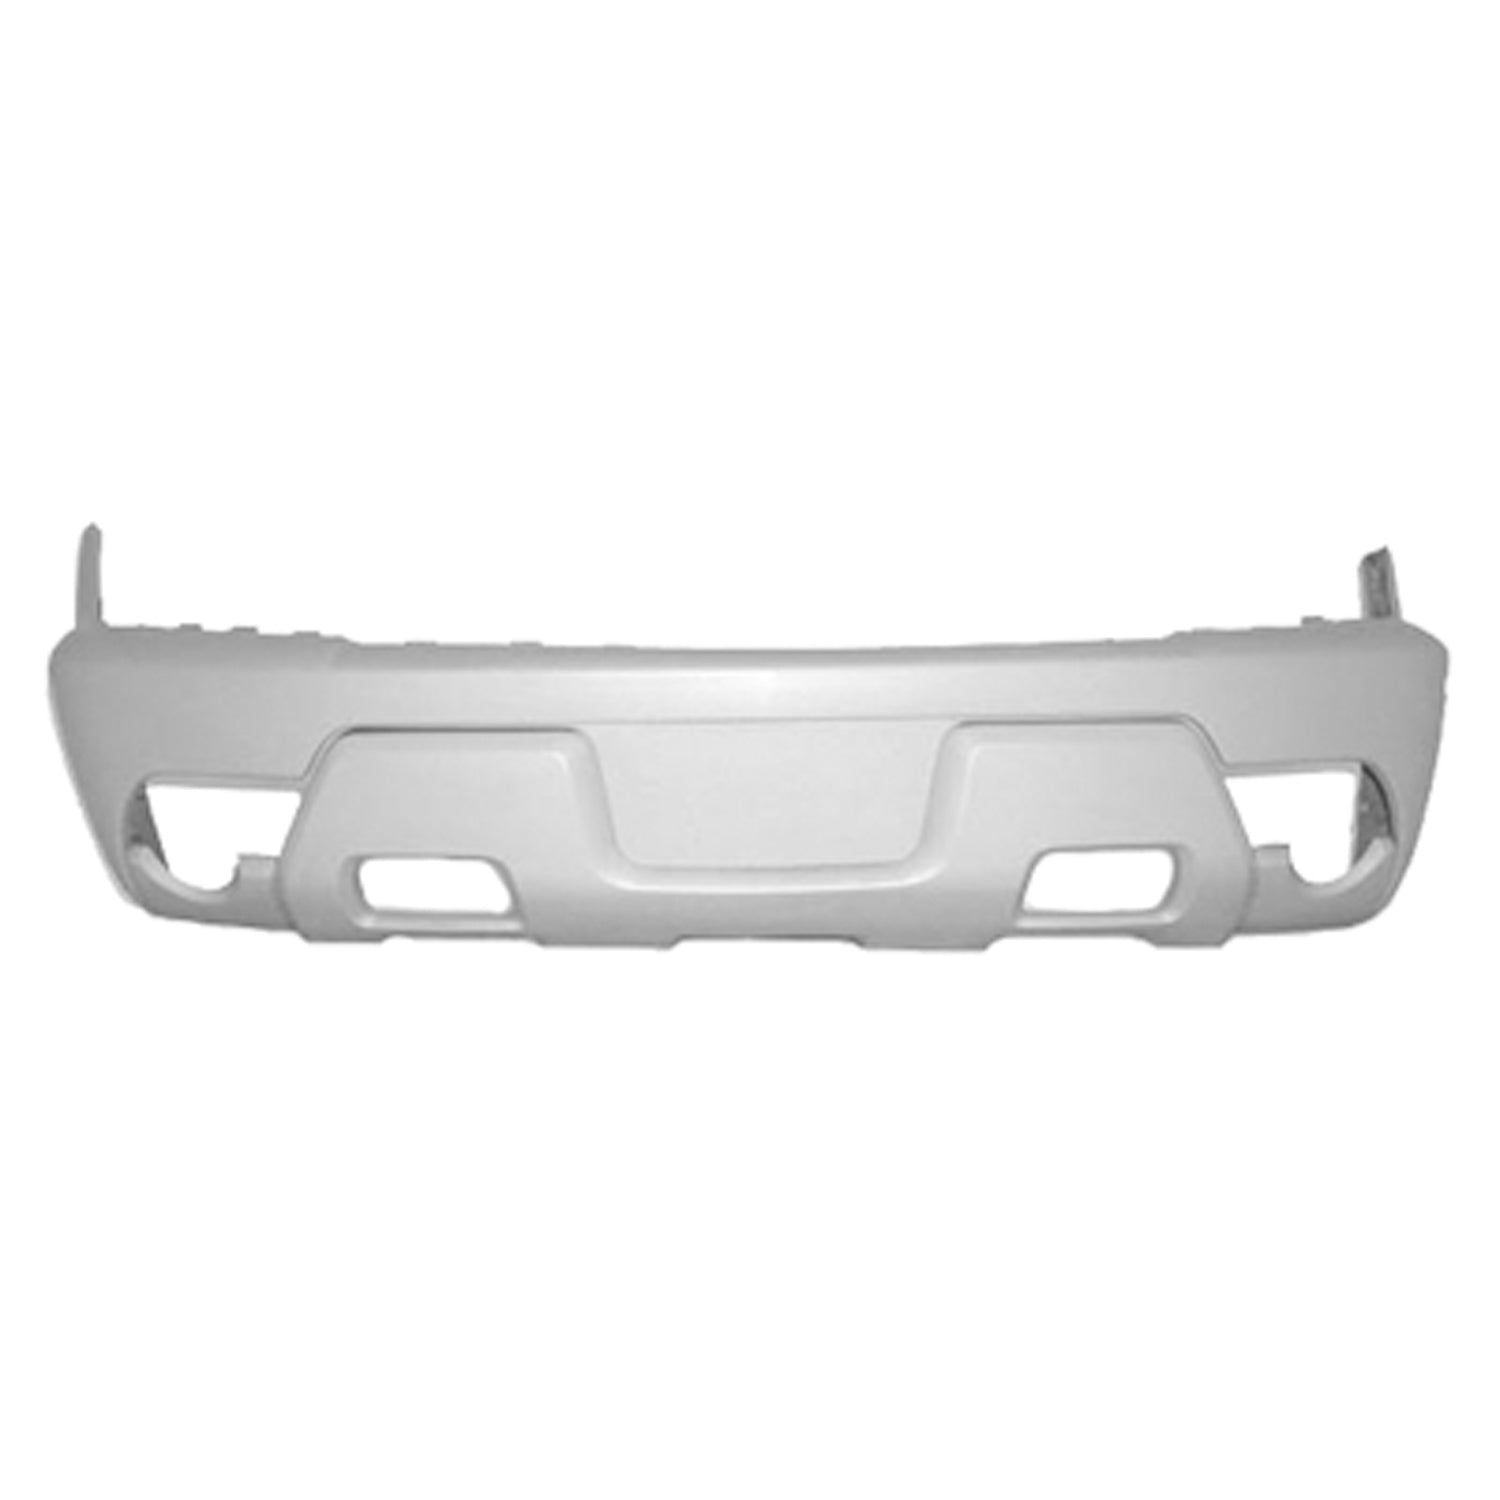 Front bumper cover 2003 - 2006 CHEVROLET AVALANCHE 1500  GM1000680 12335679